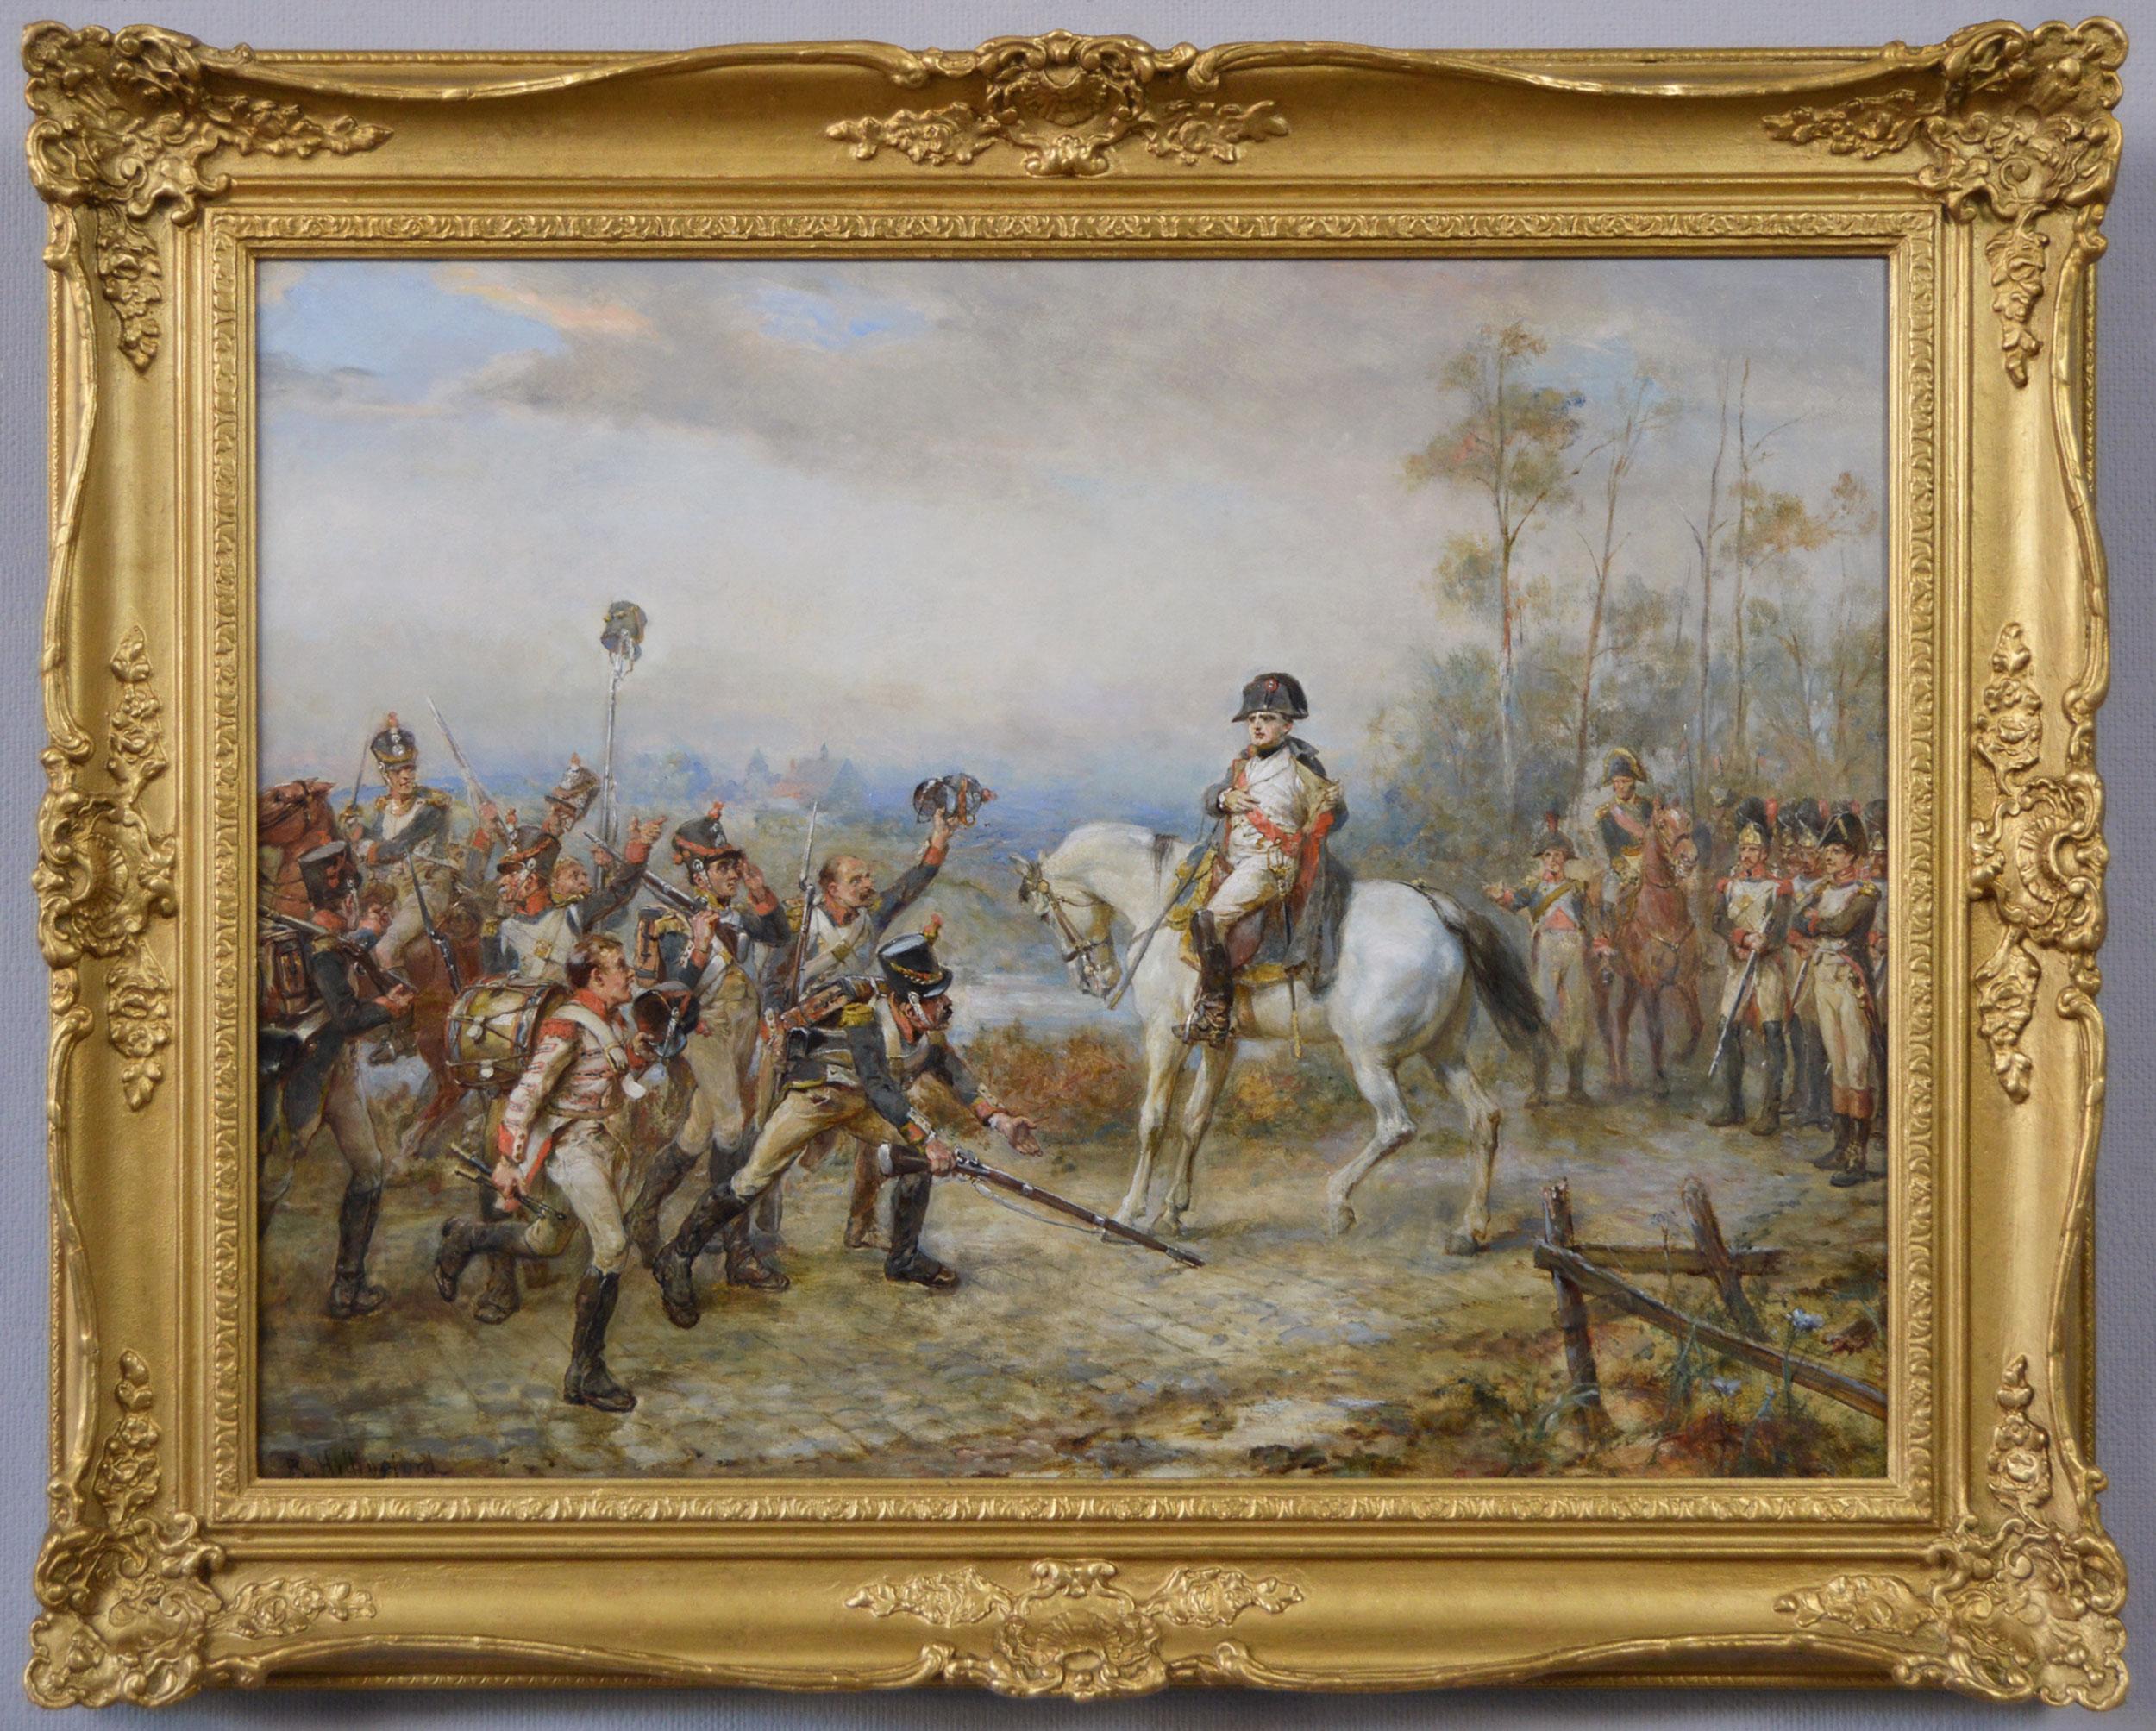 Robert Alexander Hillingford Figurative Painting - 19th Century historical genre oil painting of Napoleon’s return from Elba